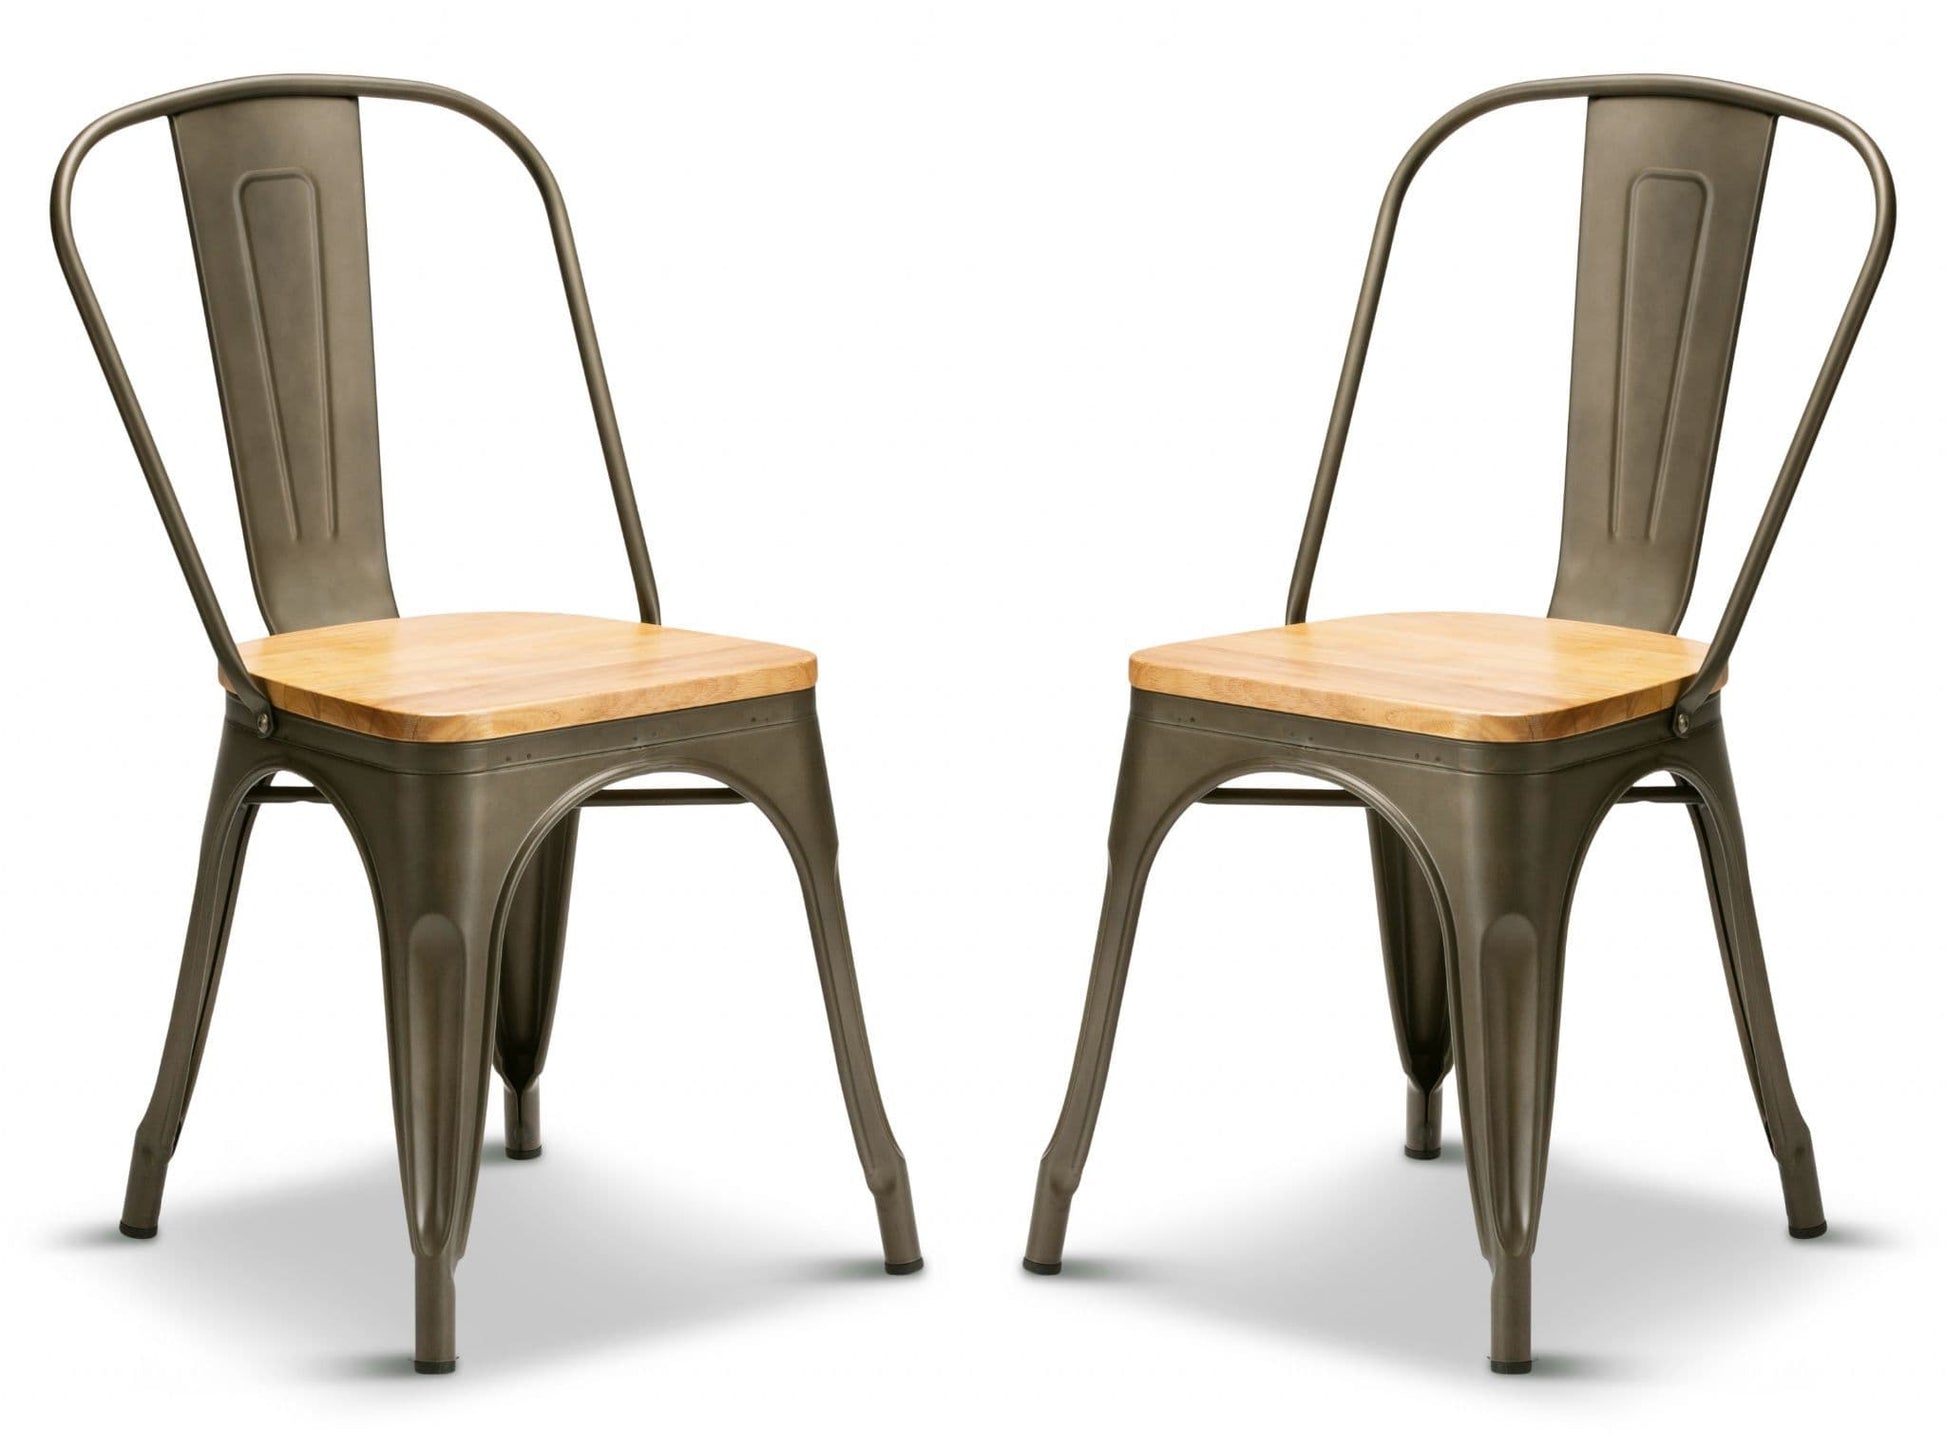 2 Gun Metal With Oak Seat Industrial Tolix Style Dining Chairs